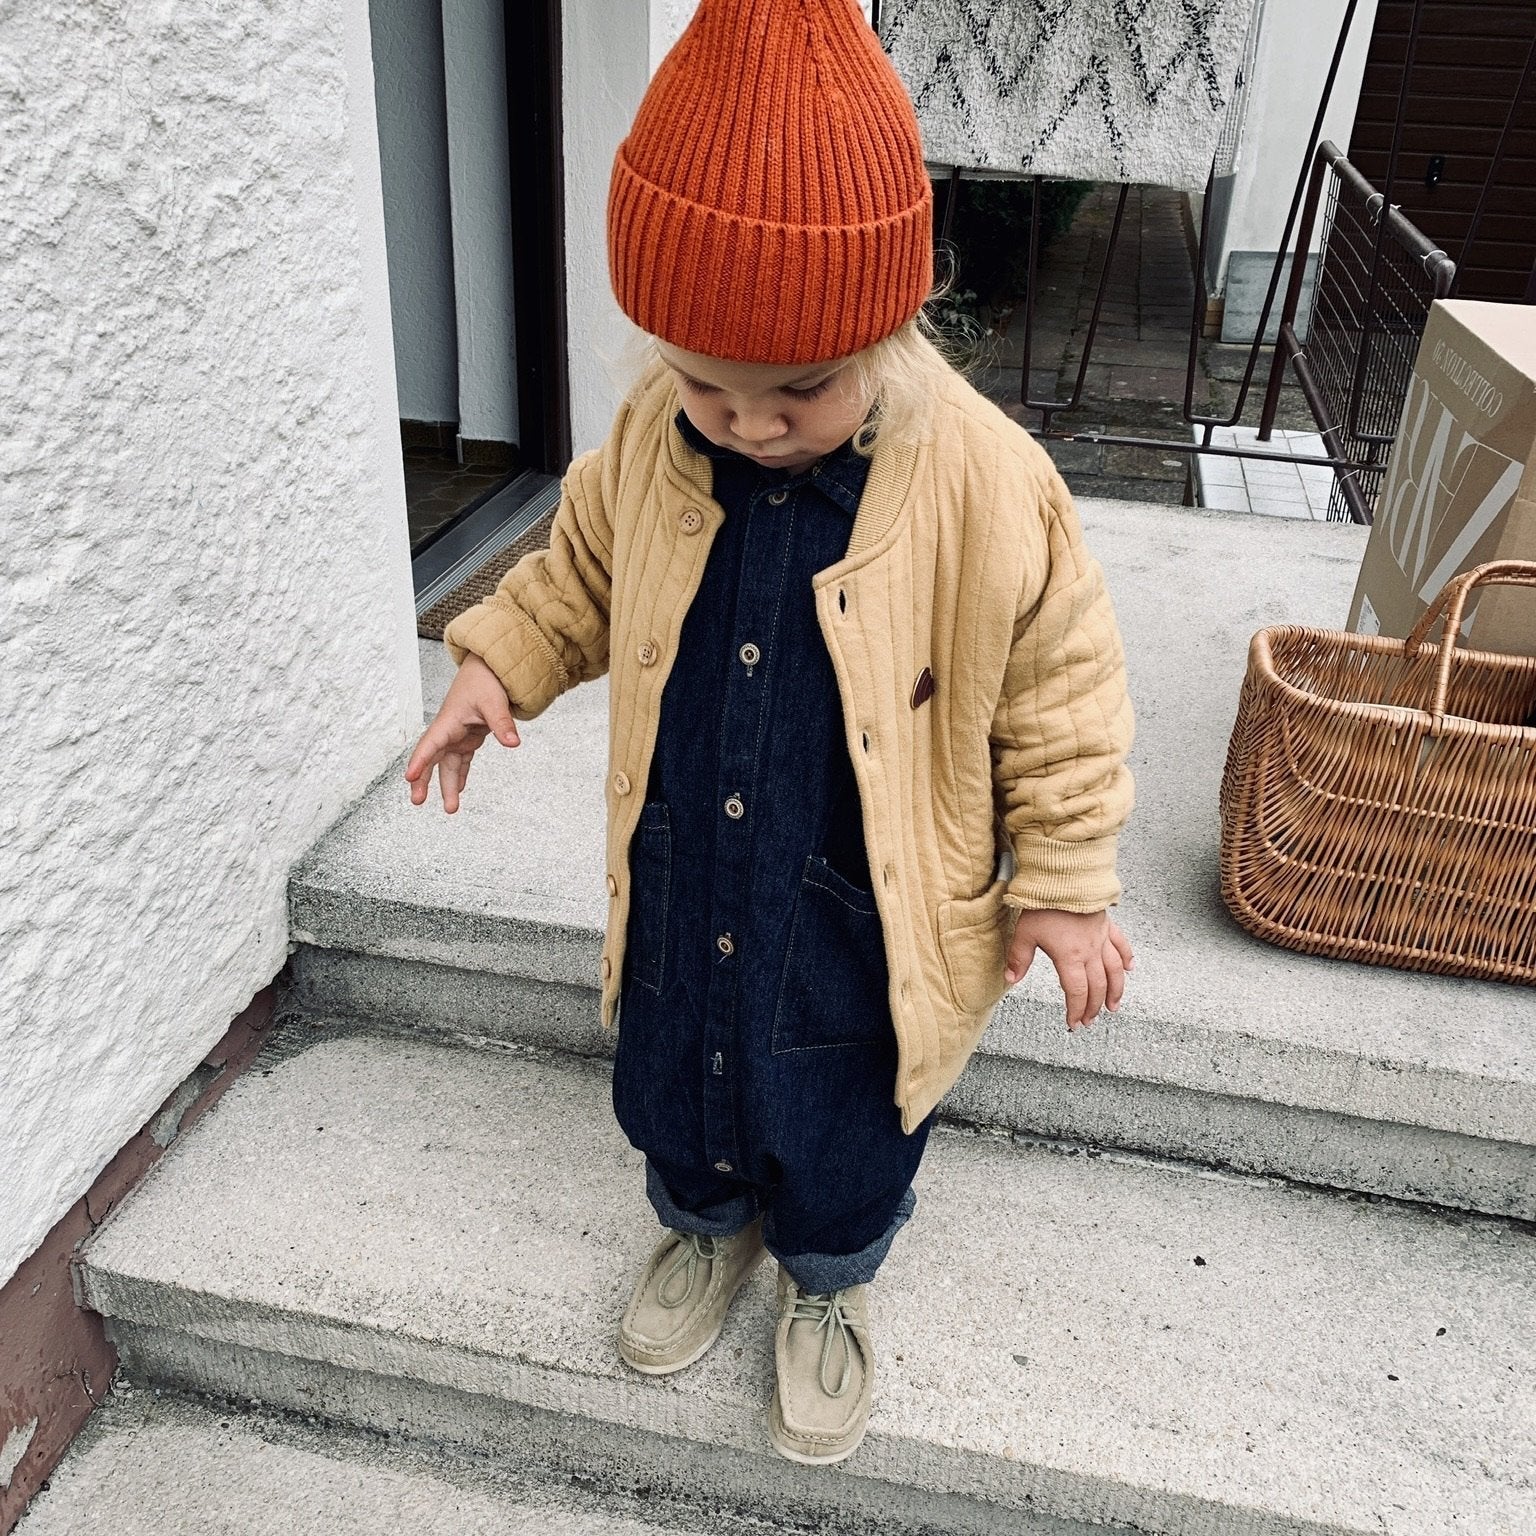 Statement Overall find Stylish Fashion for Little People- at Little Foxx Concept Store